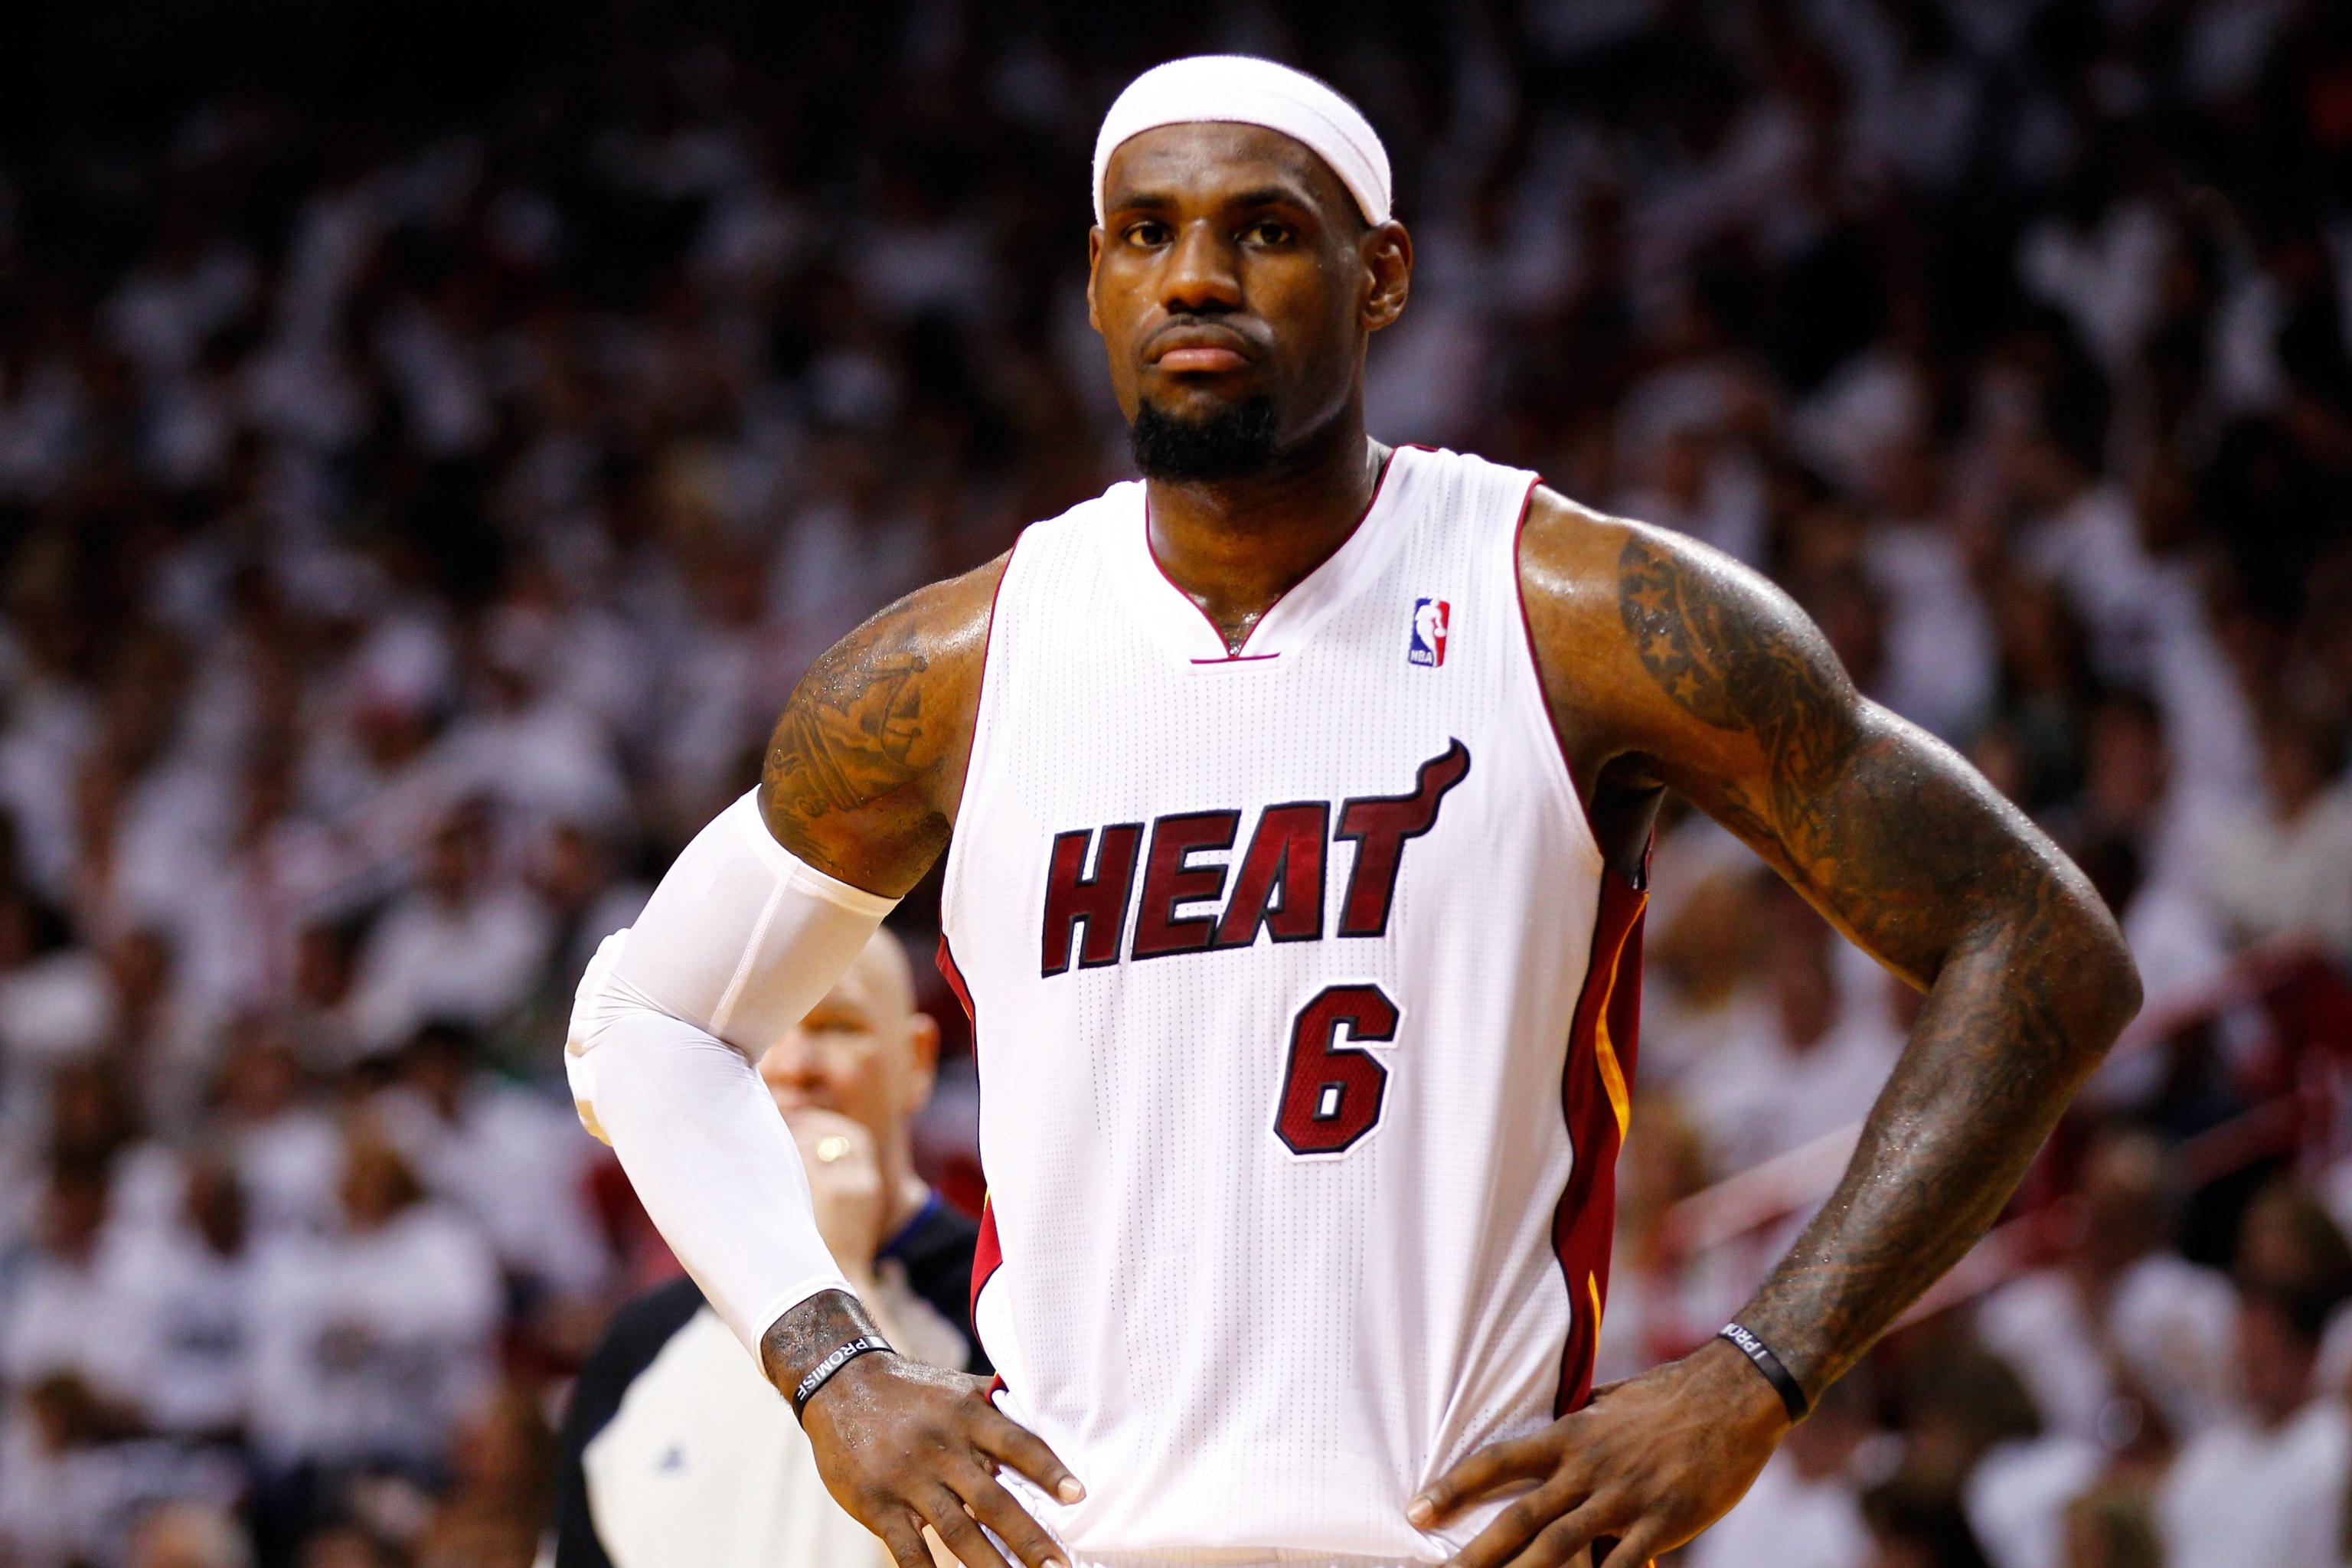 NBA - The Miami Heat ranked 1st in Net Rating in the 2012